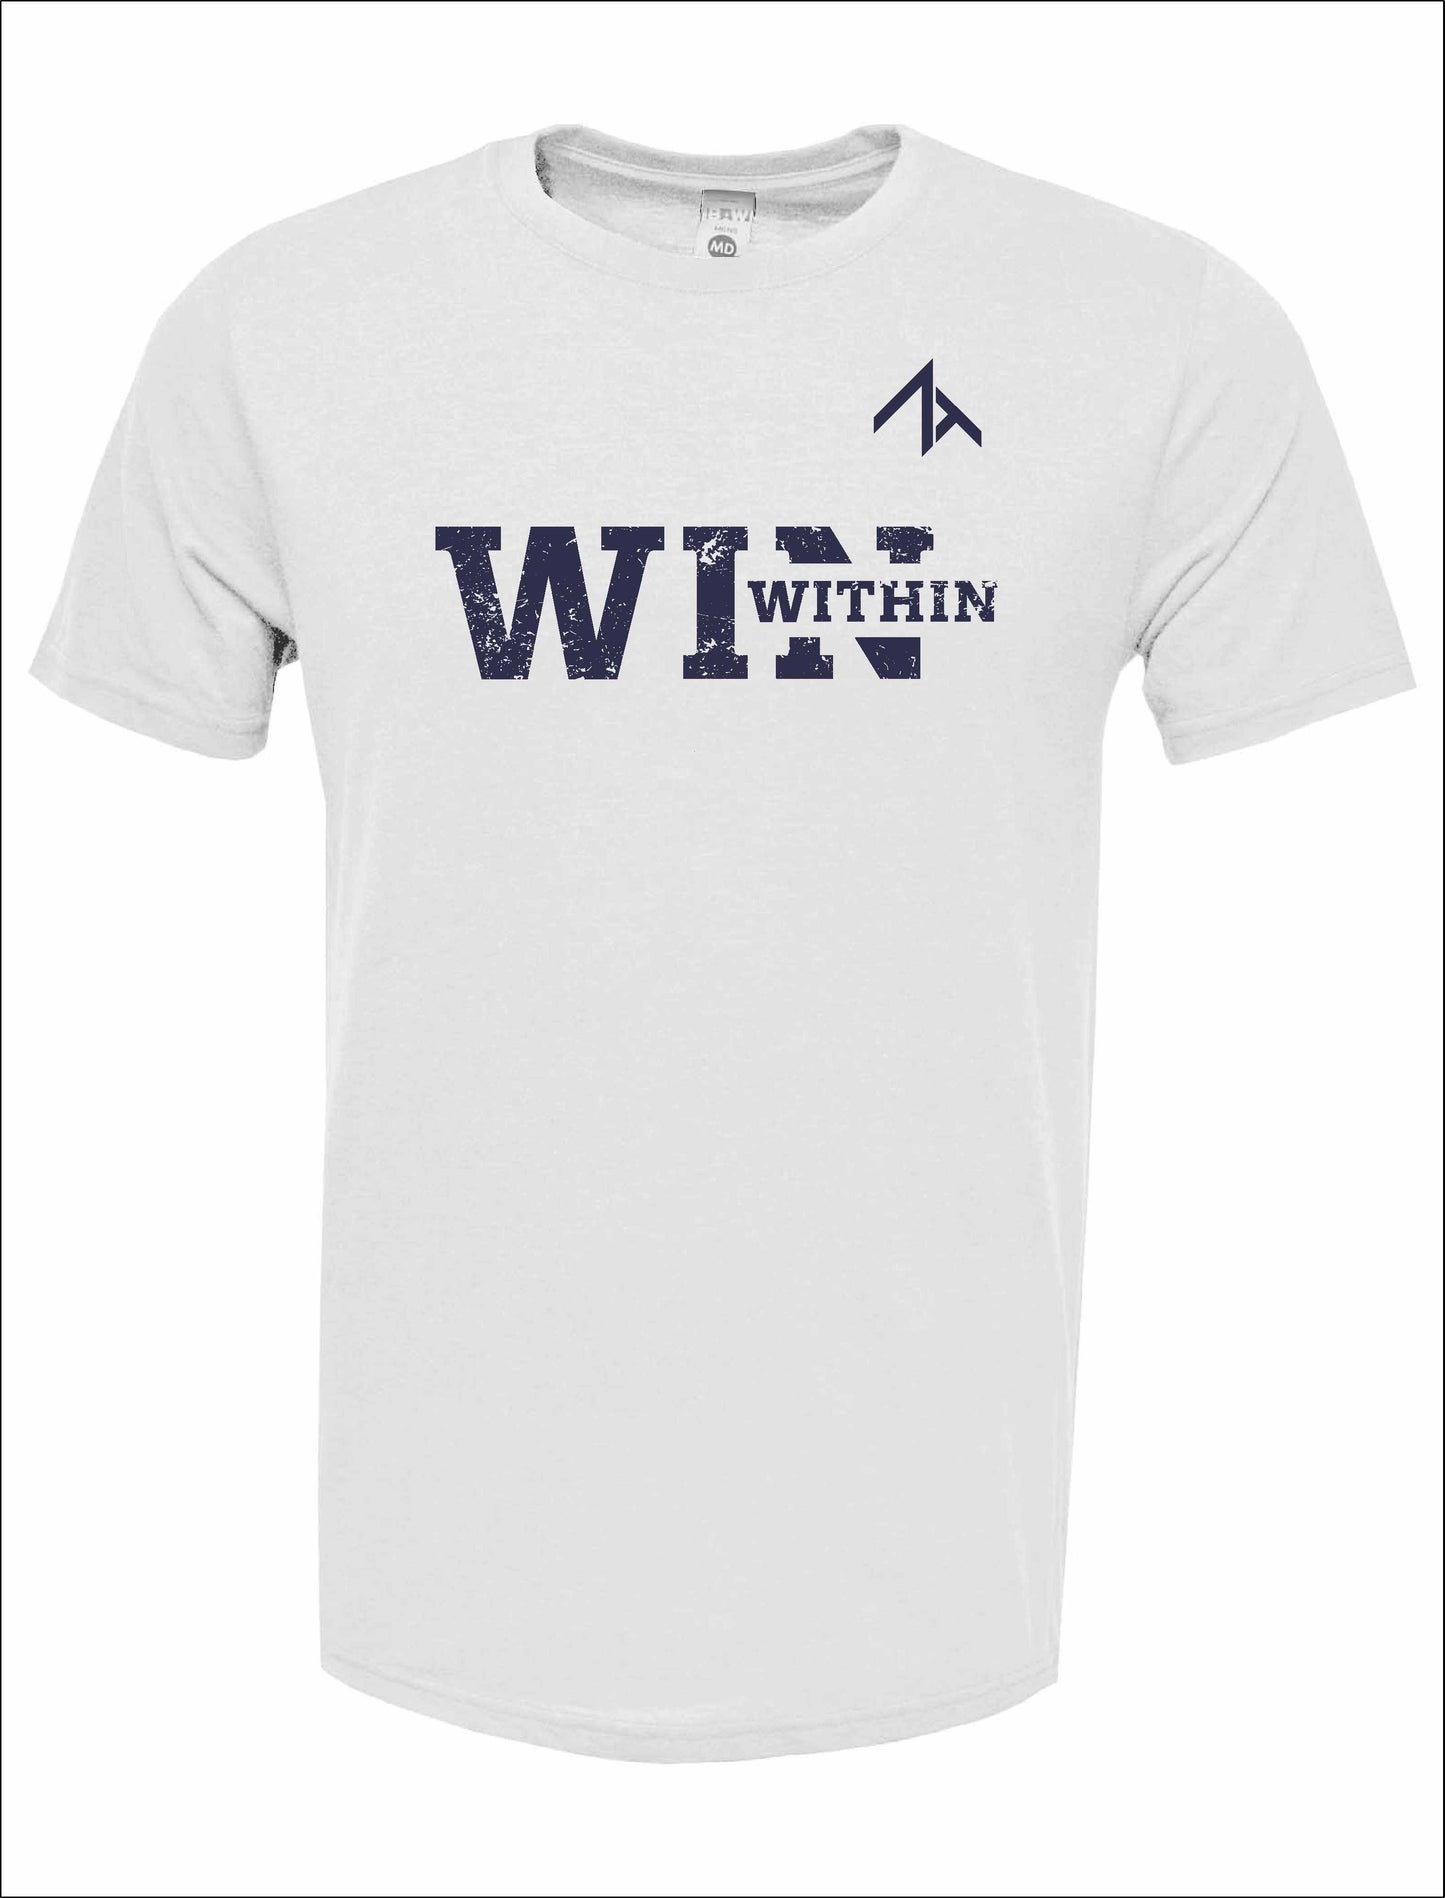 Short Sleeve "WIN WITHIN" Dri-fit T-Shirt